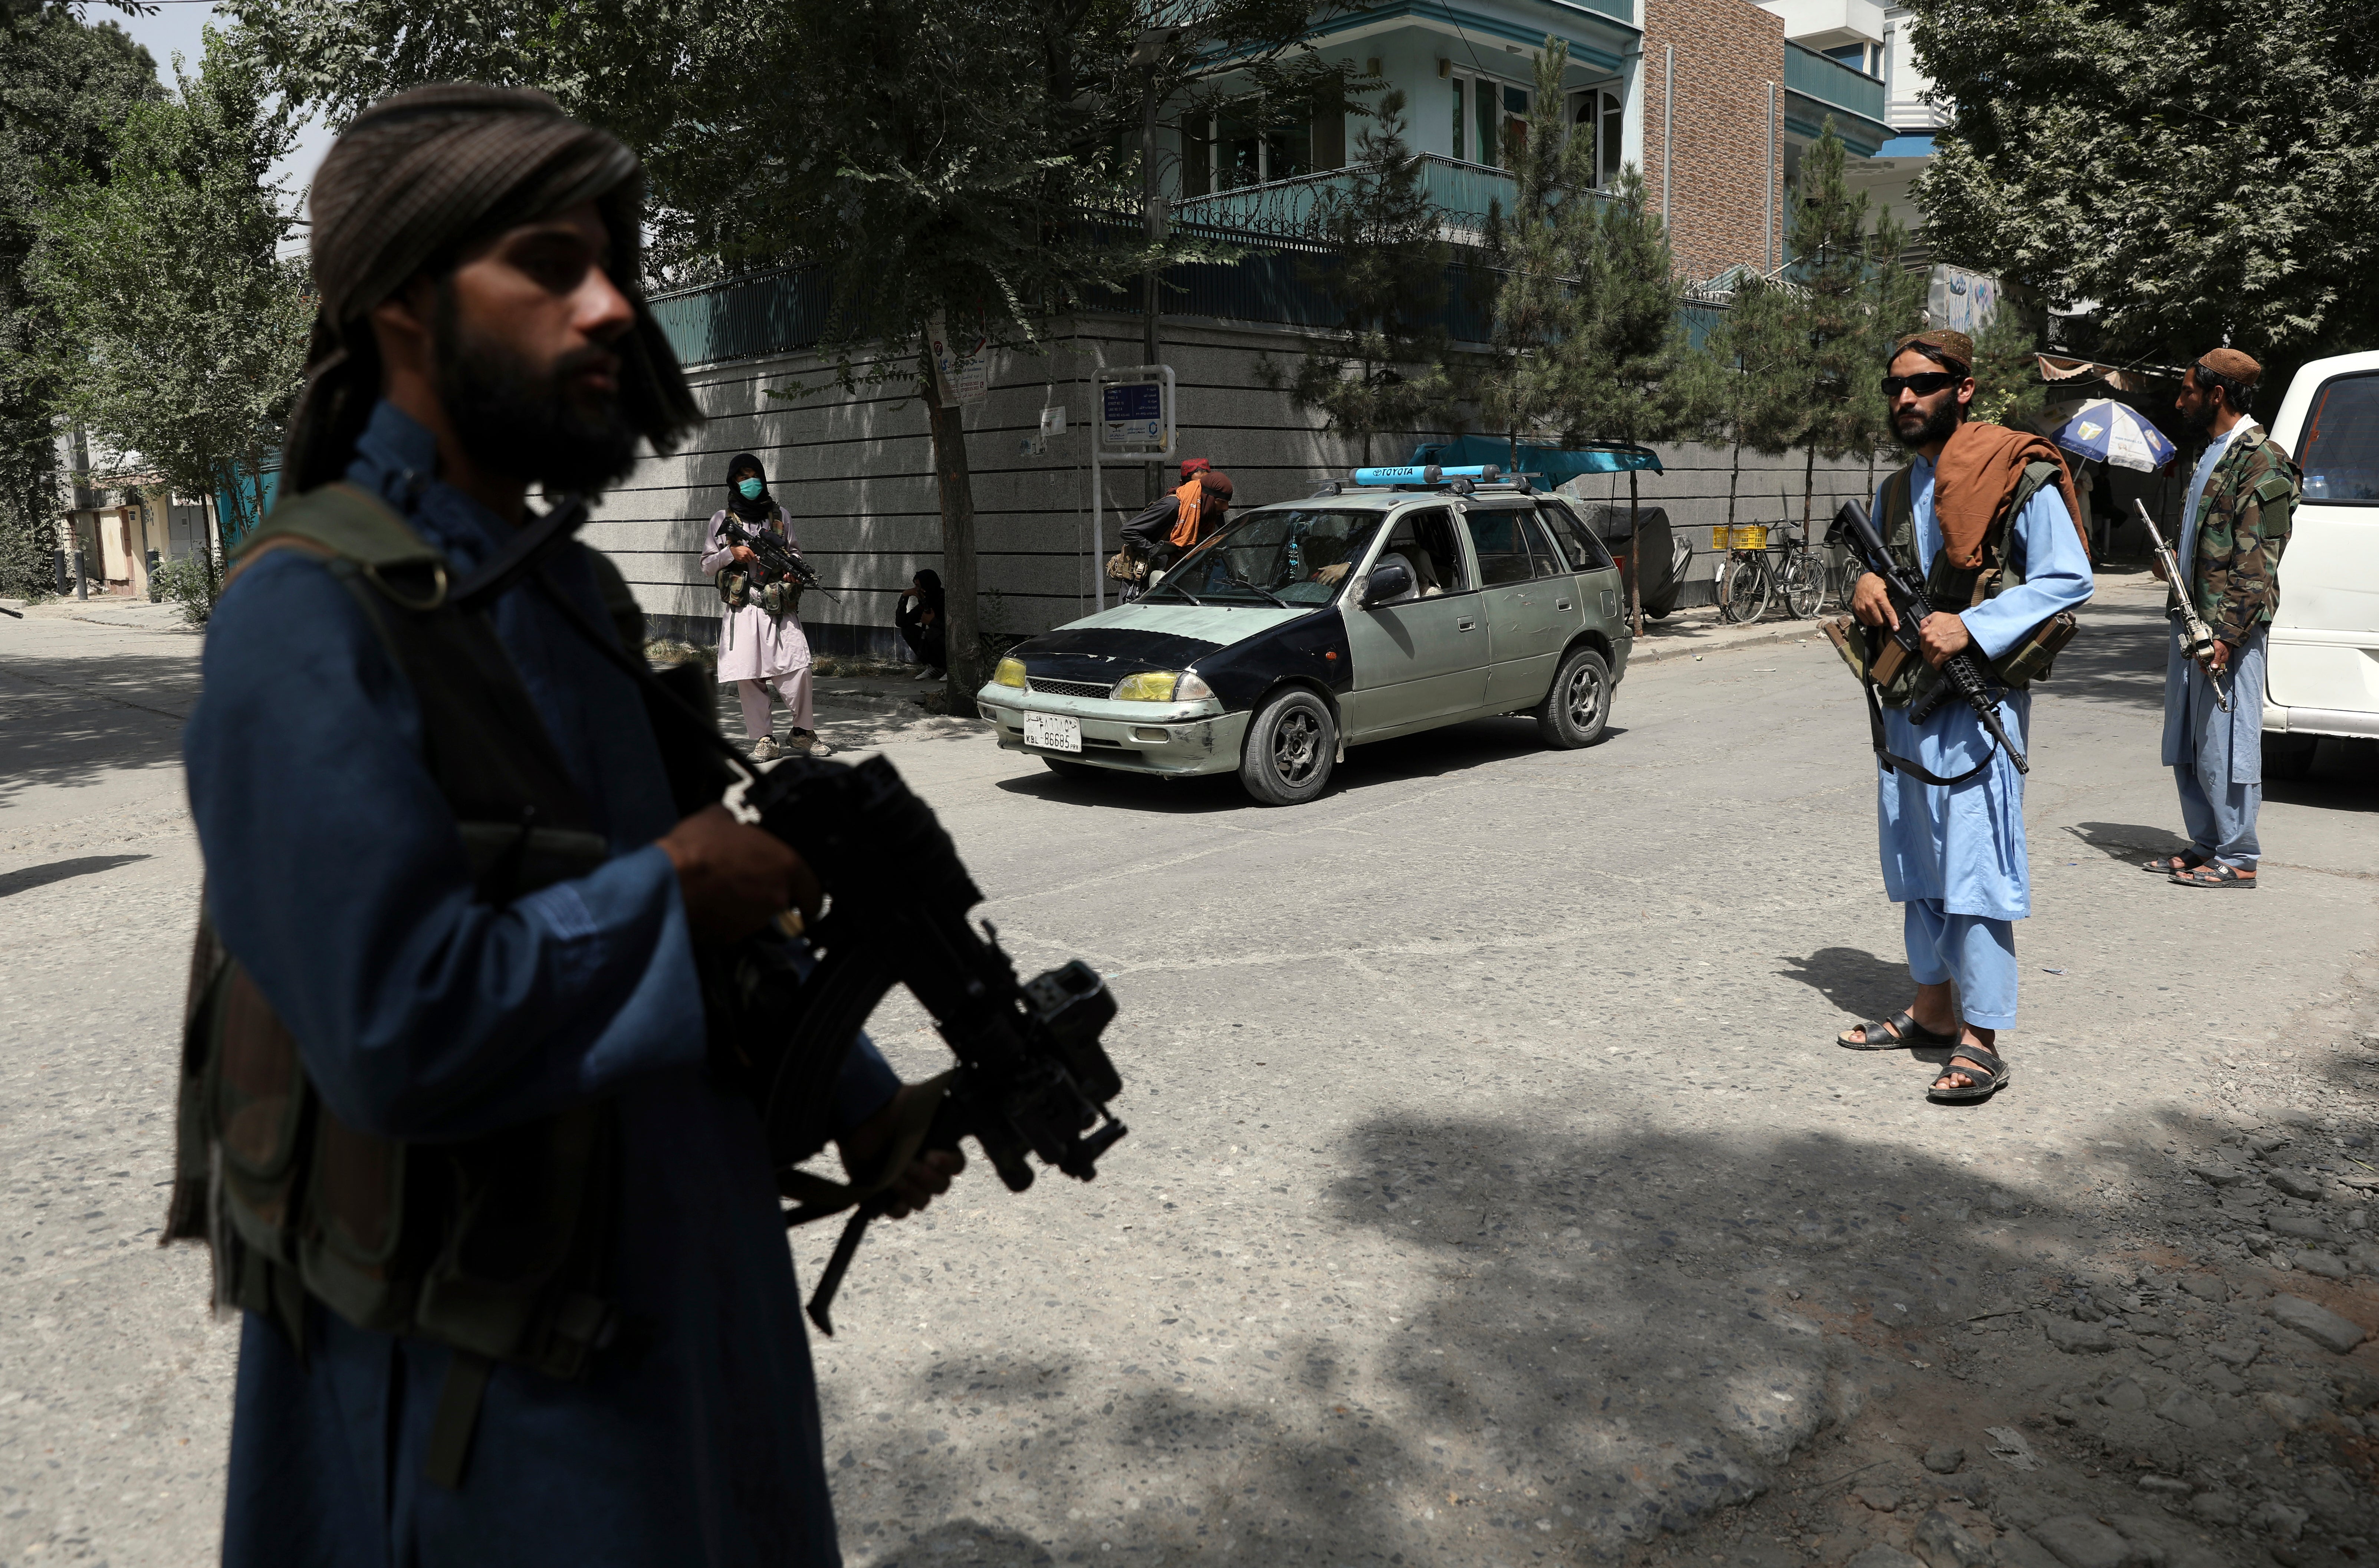 Taliban fighters stand guard at a checkpoint in the Wazir Akbar Khan neighborhood in the city of Kabul